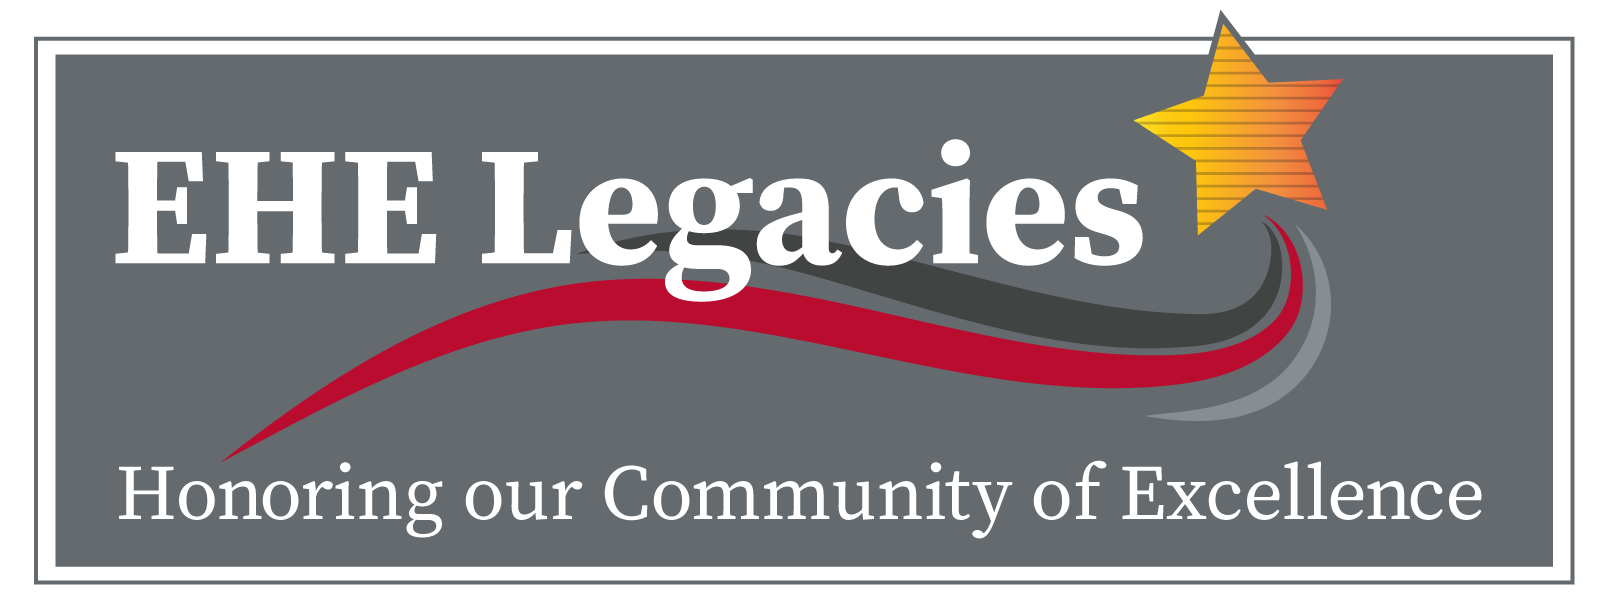 "EHE Legacies Honoring our Community of Excellence" banner